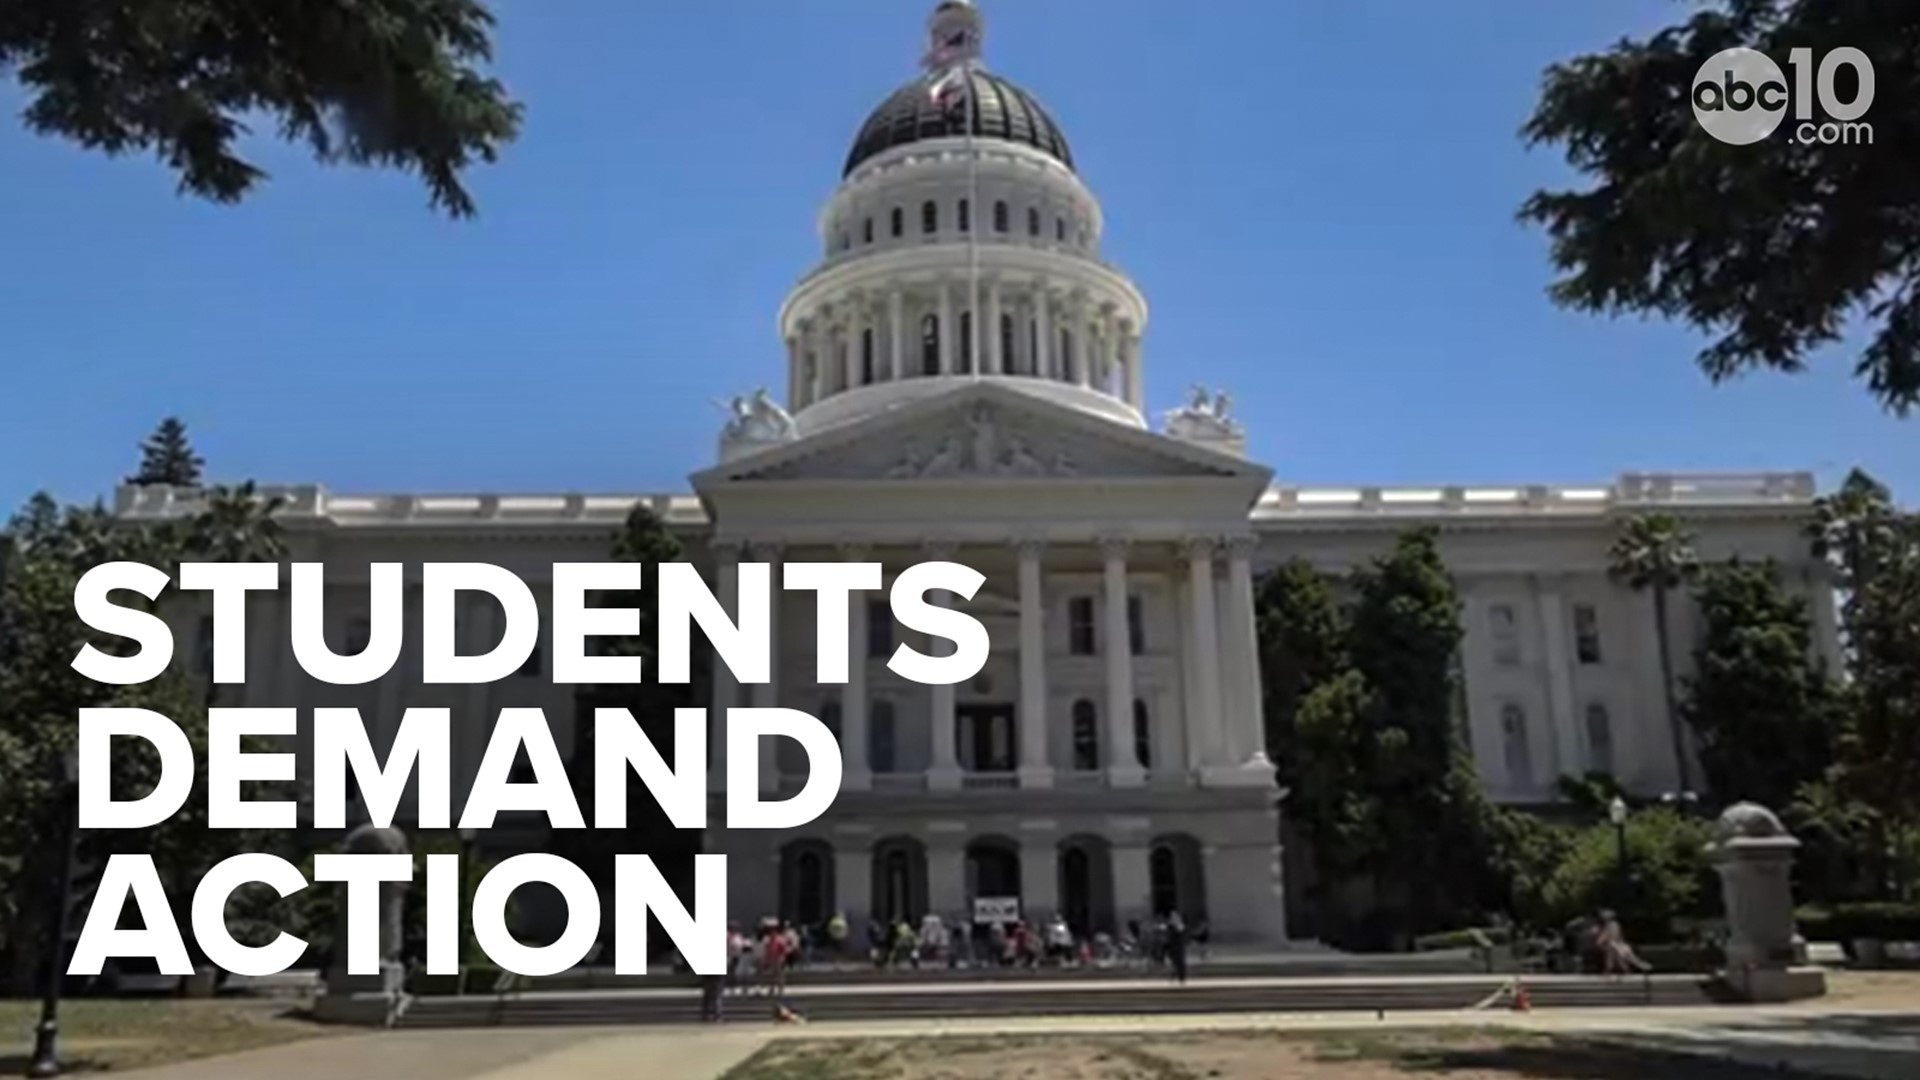 Students Demand Action, a group made up of student activists, gathered at the state capitol Wednesday to support bills they think would help end gun violence.